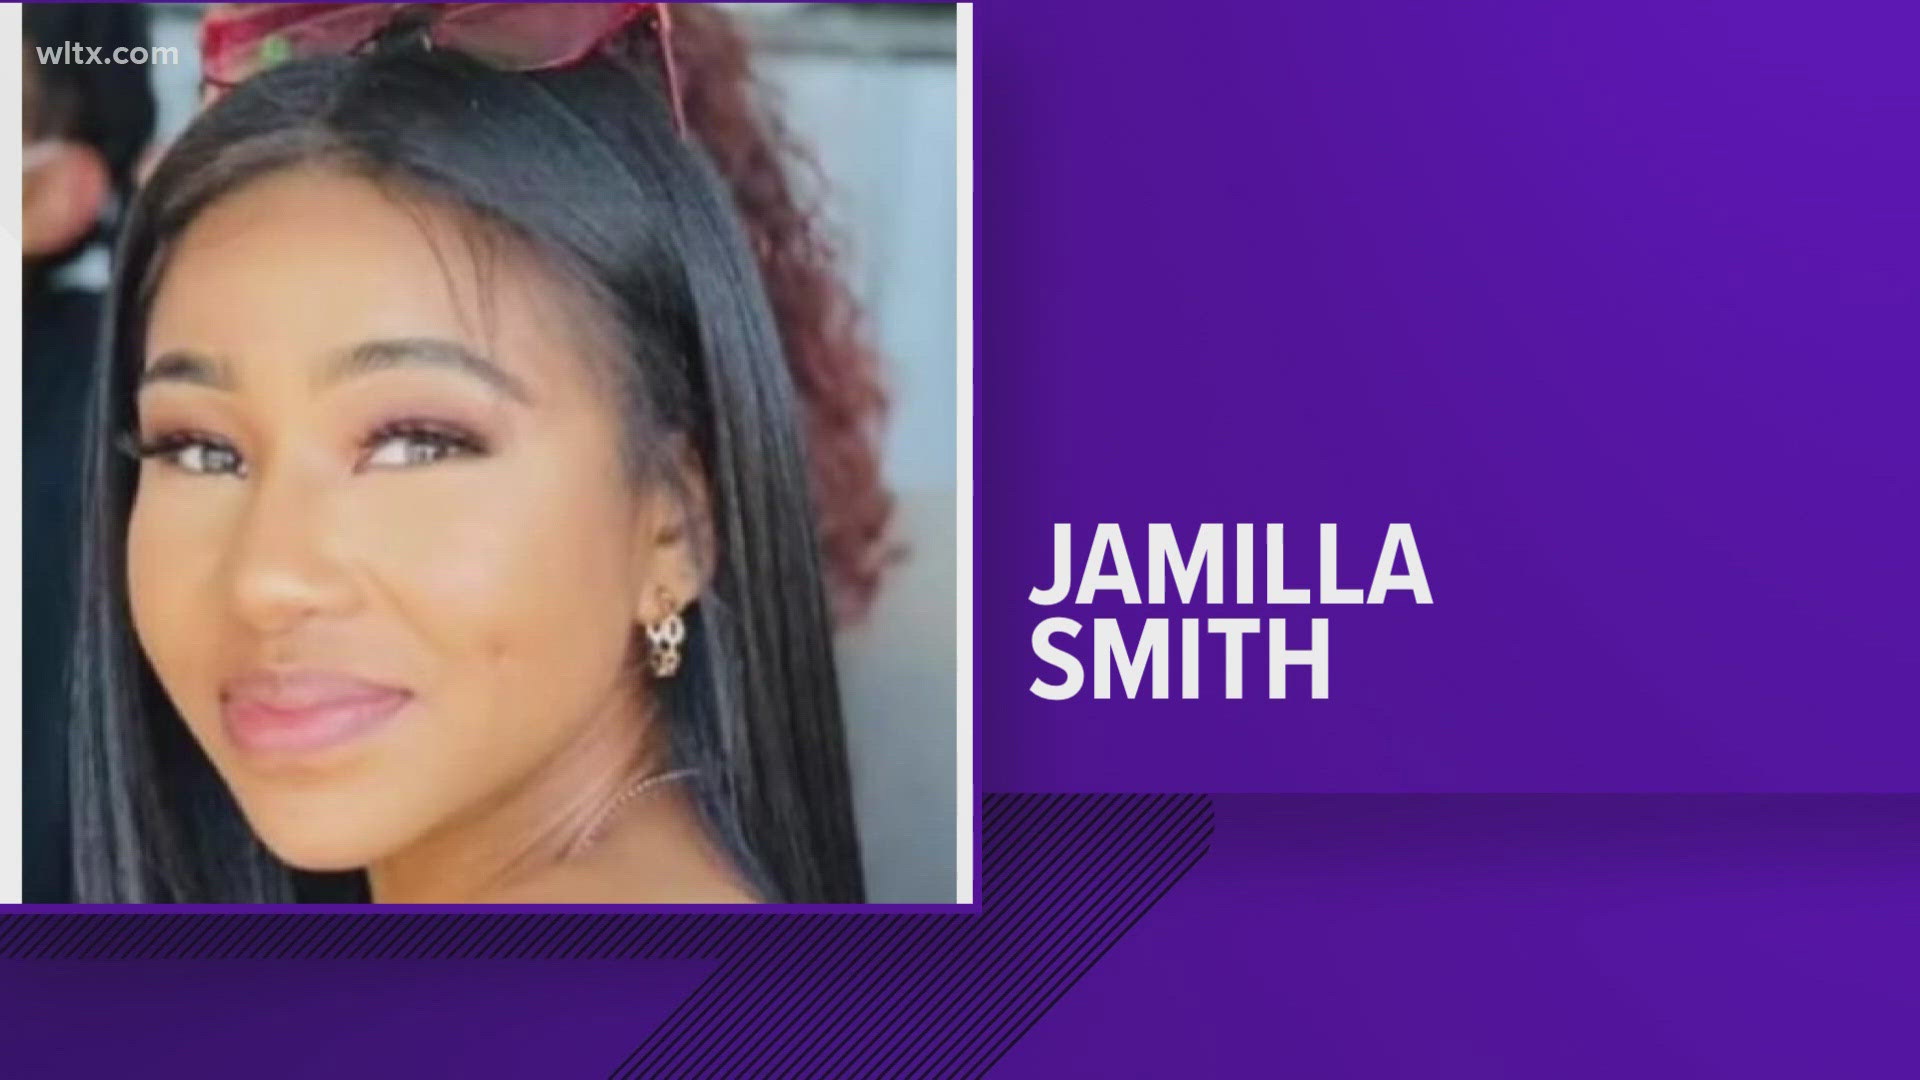 The Aiken County Sheriff's Office announced on Friday that Jamilla "Millie" Shanae' Smith's remains have been found after a months-long murder investigation.